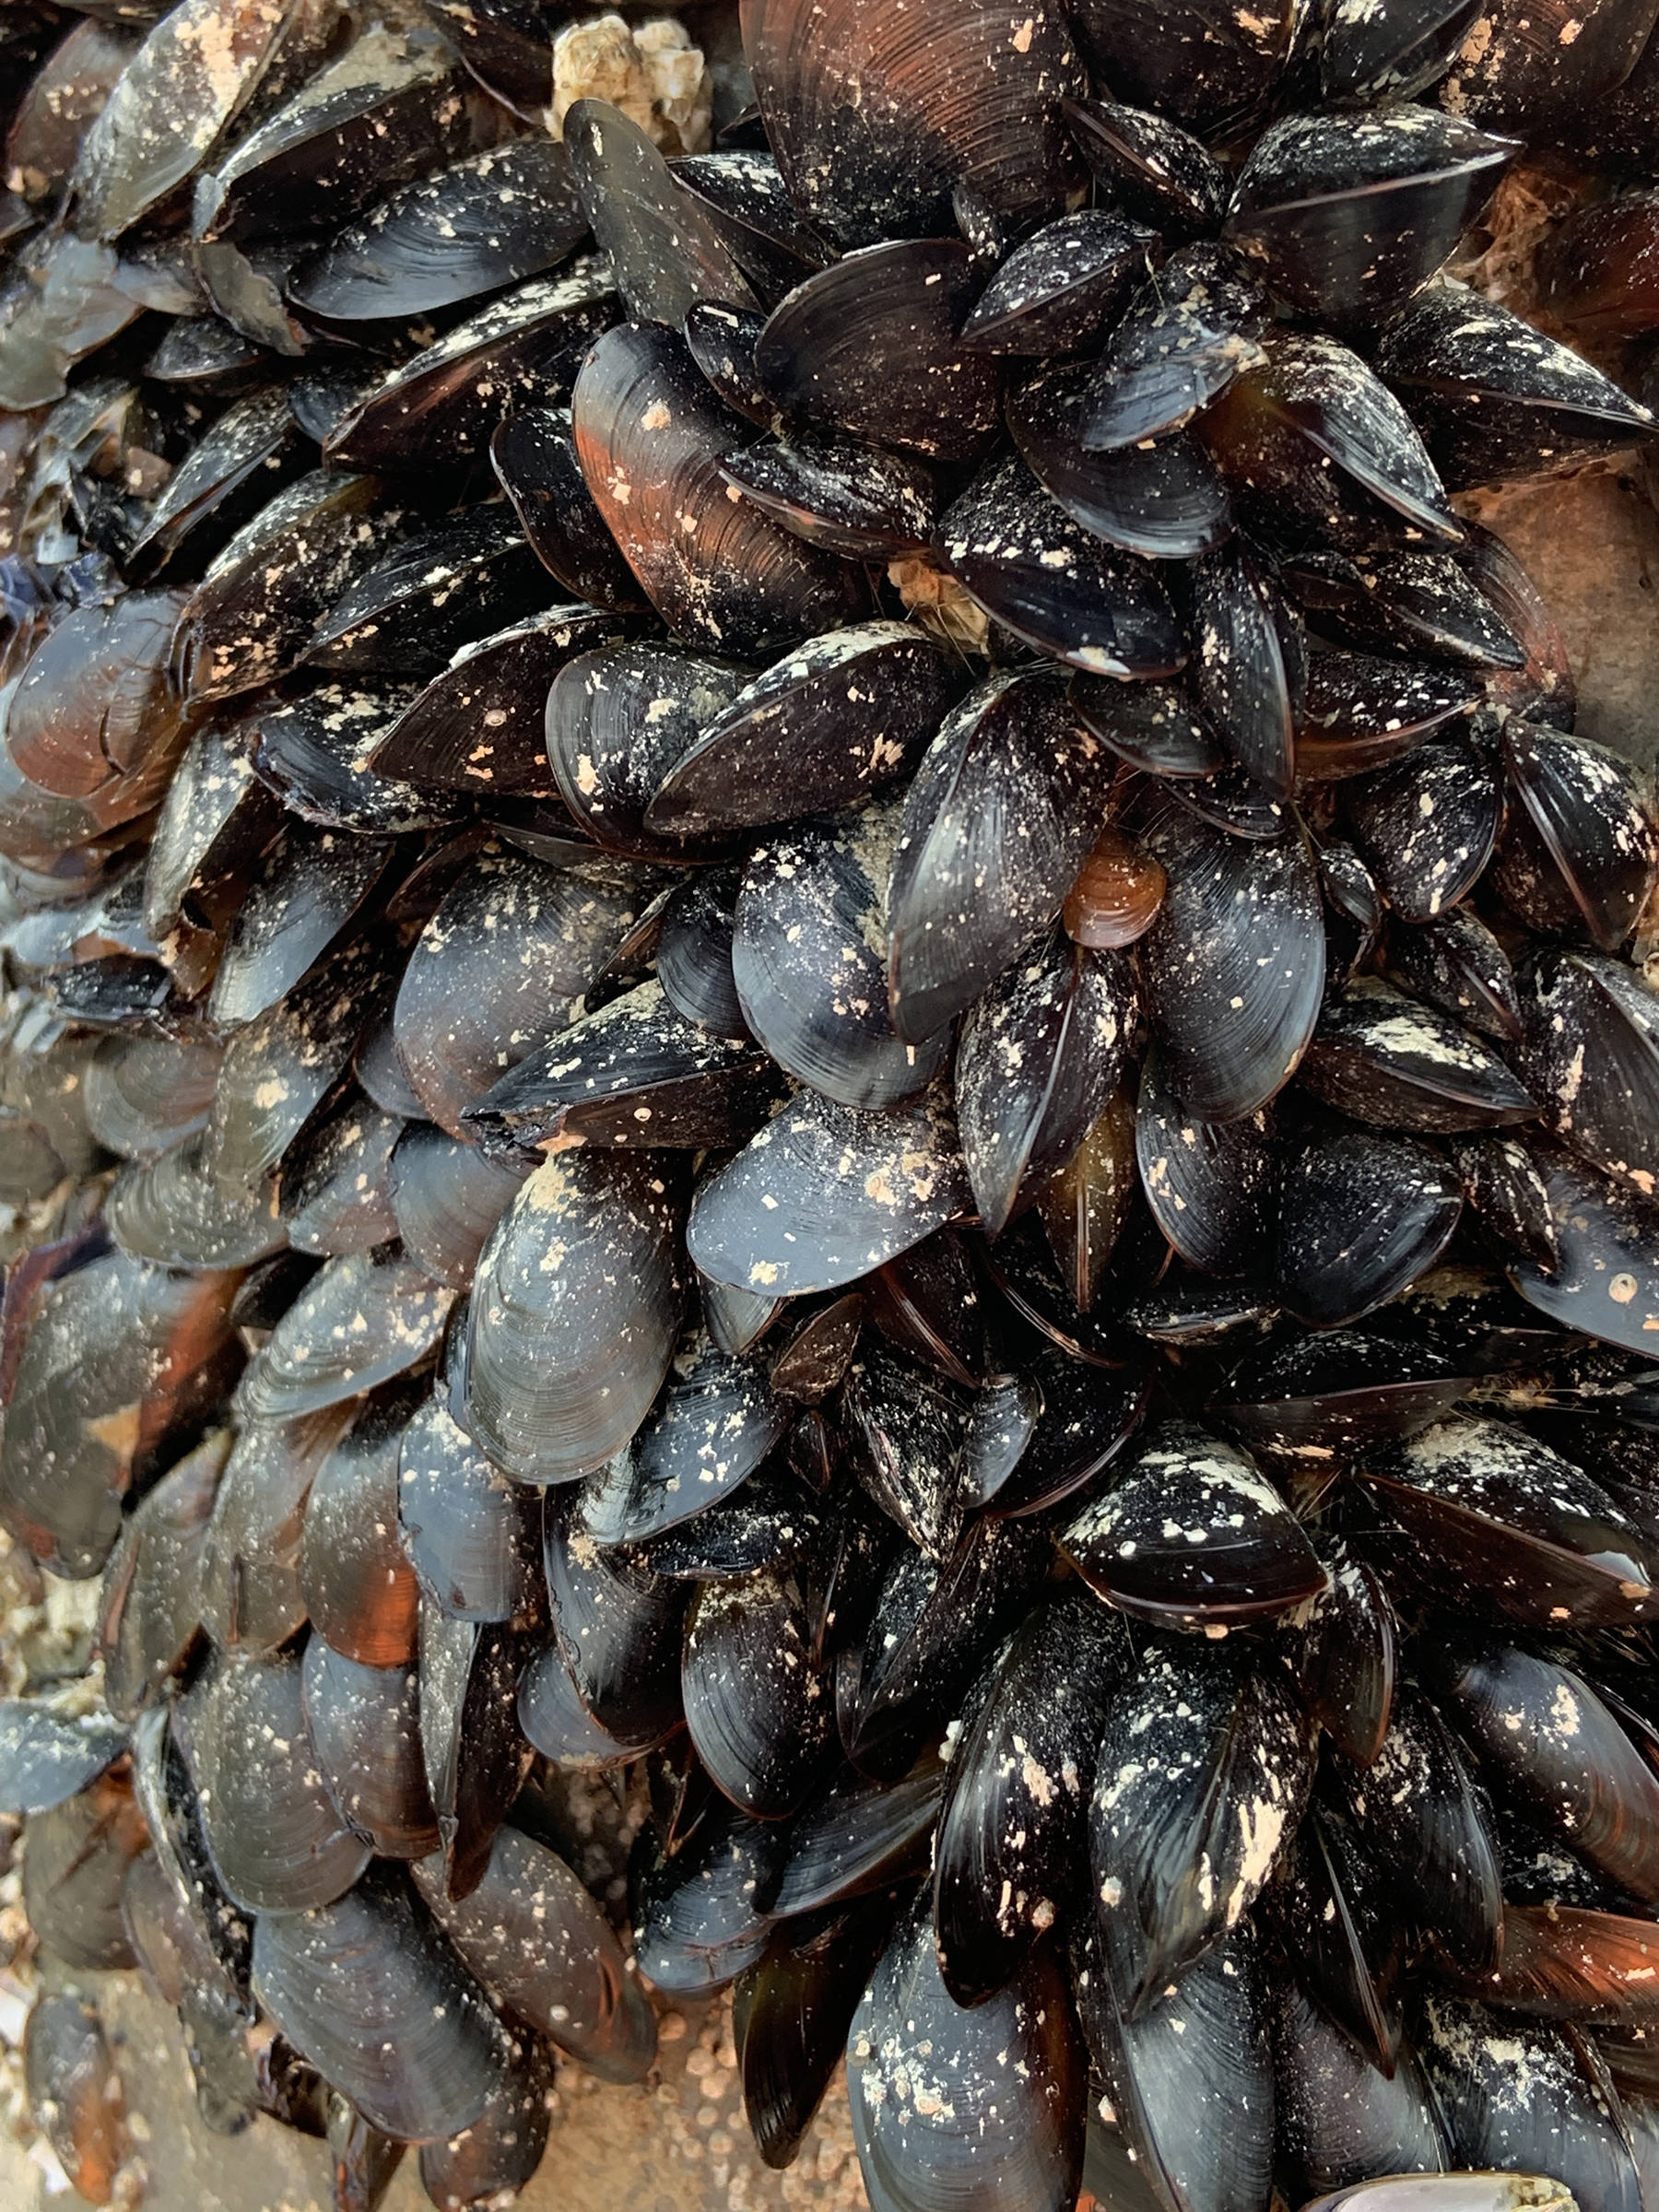 Mussels rest on a dock pole at the Don D. Statter Harbor boat ramp in Auke Bay on July 5, 2019. (Courtesy Photo | Cathy Squires)